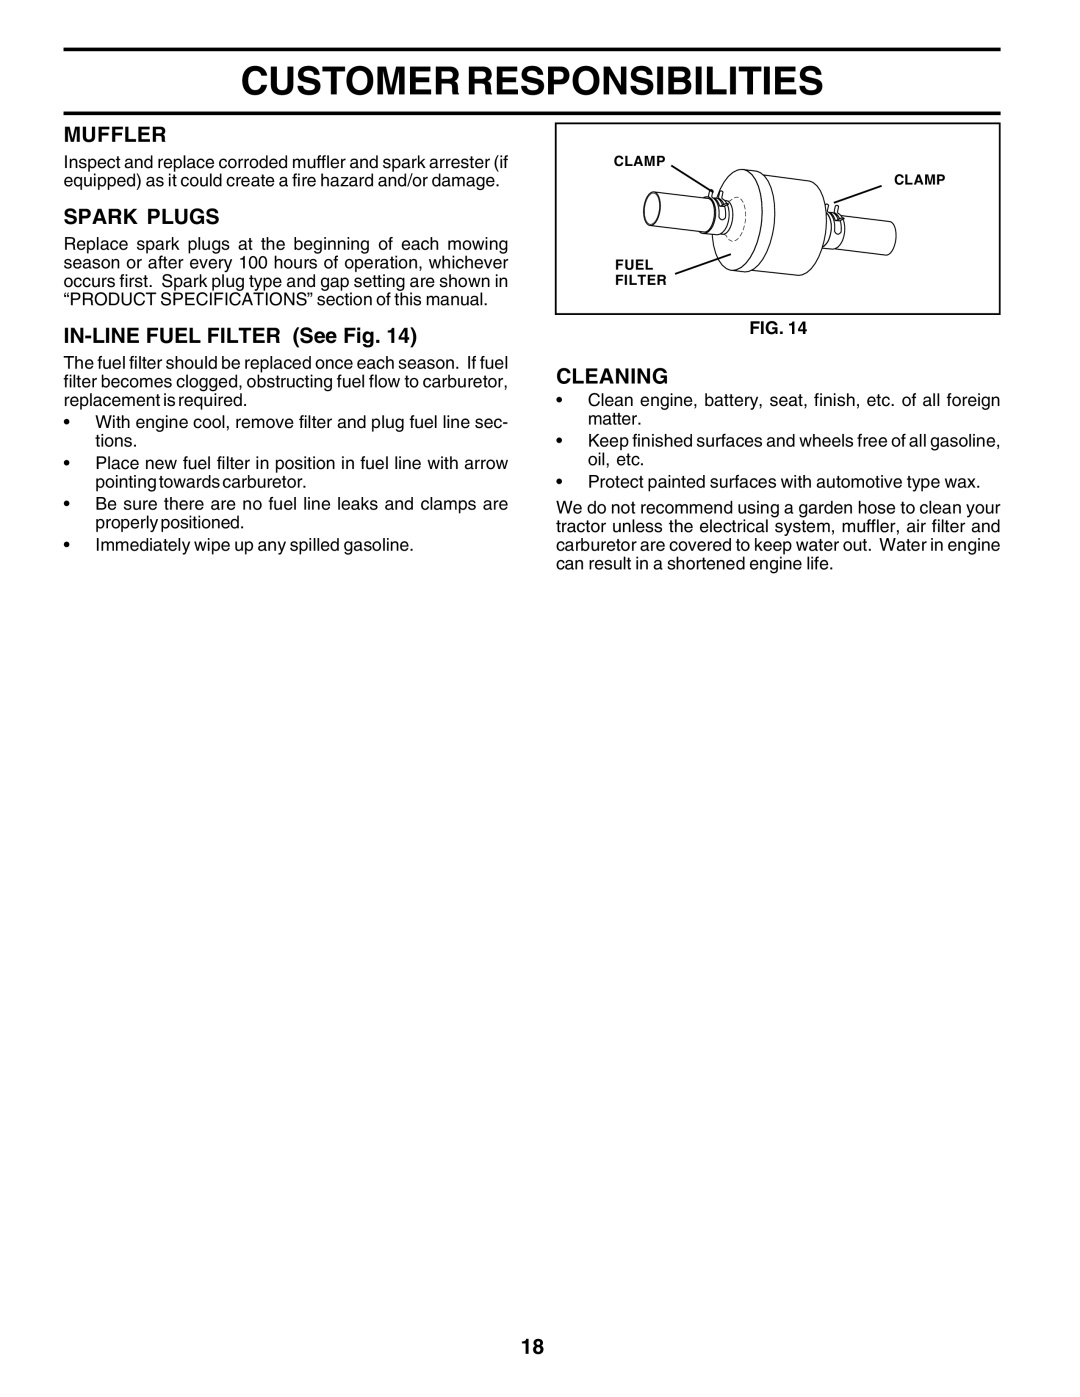 Poulan 182946 manual Muffler, Spark Plugs, IN-LINEFUEL FILTER See Fig, Cleaning, Customer Responsibilities 